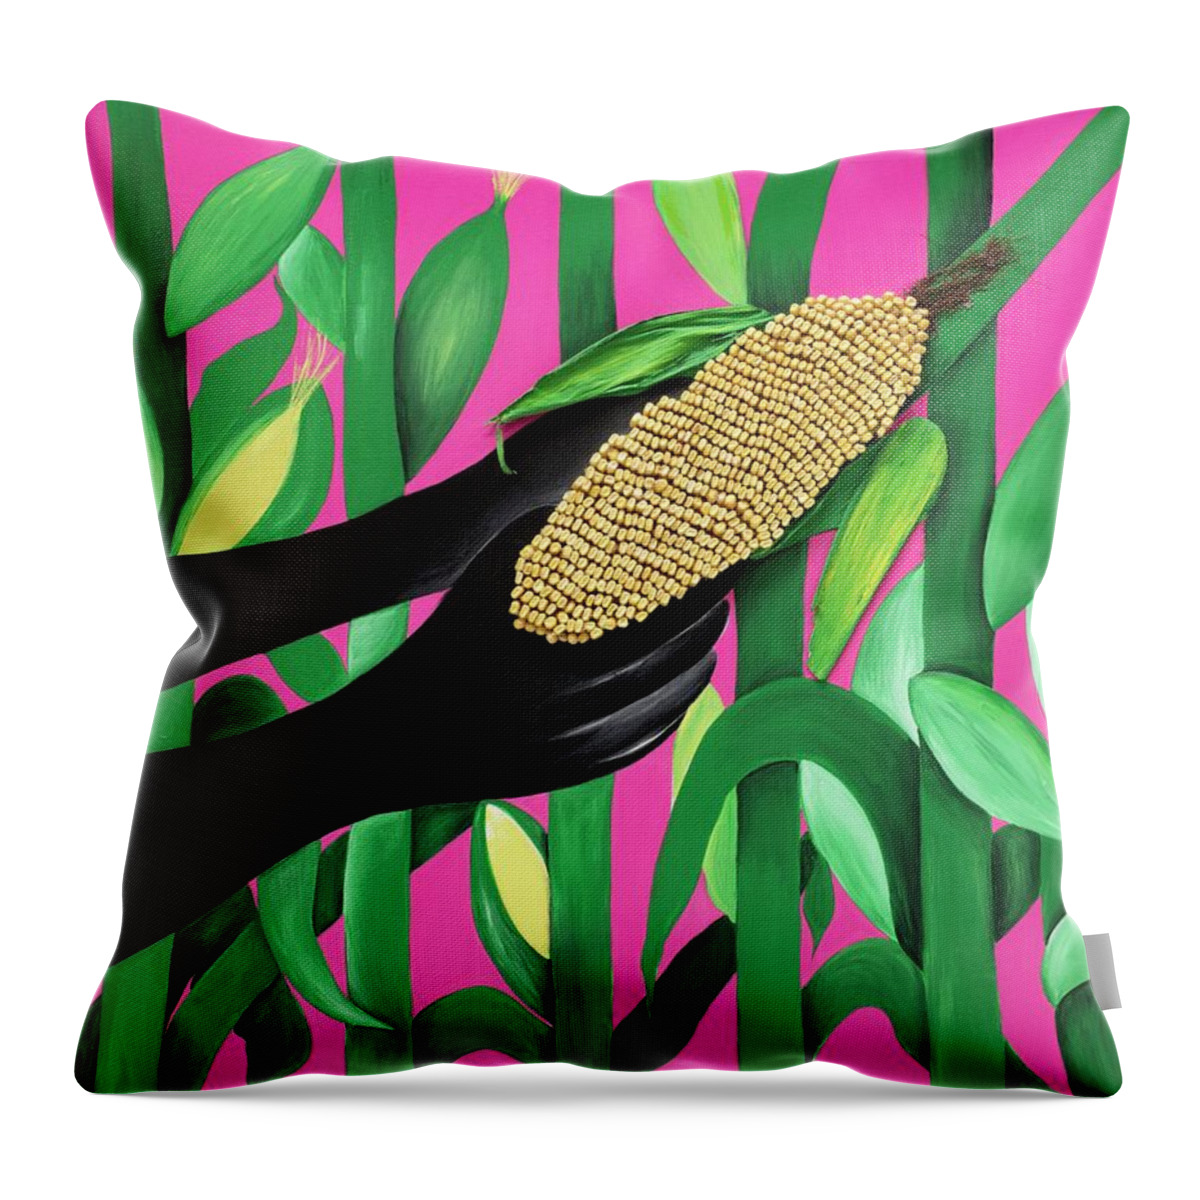 Sabree Throw Pillow featuring the painting Gold by Patricia Sabreee